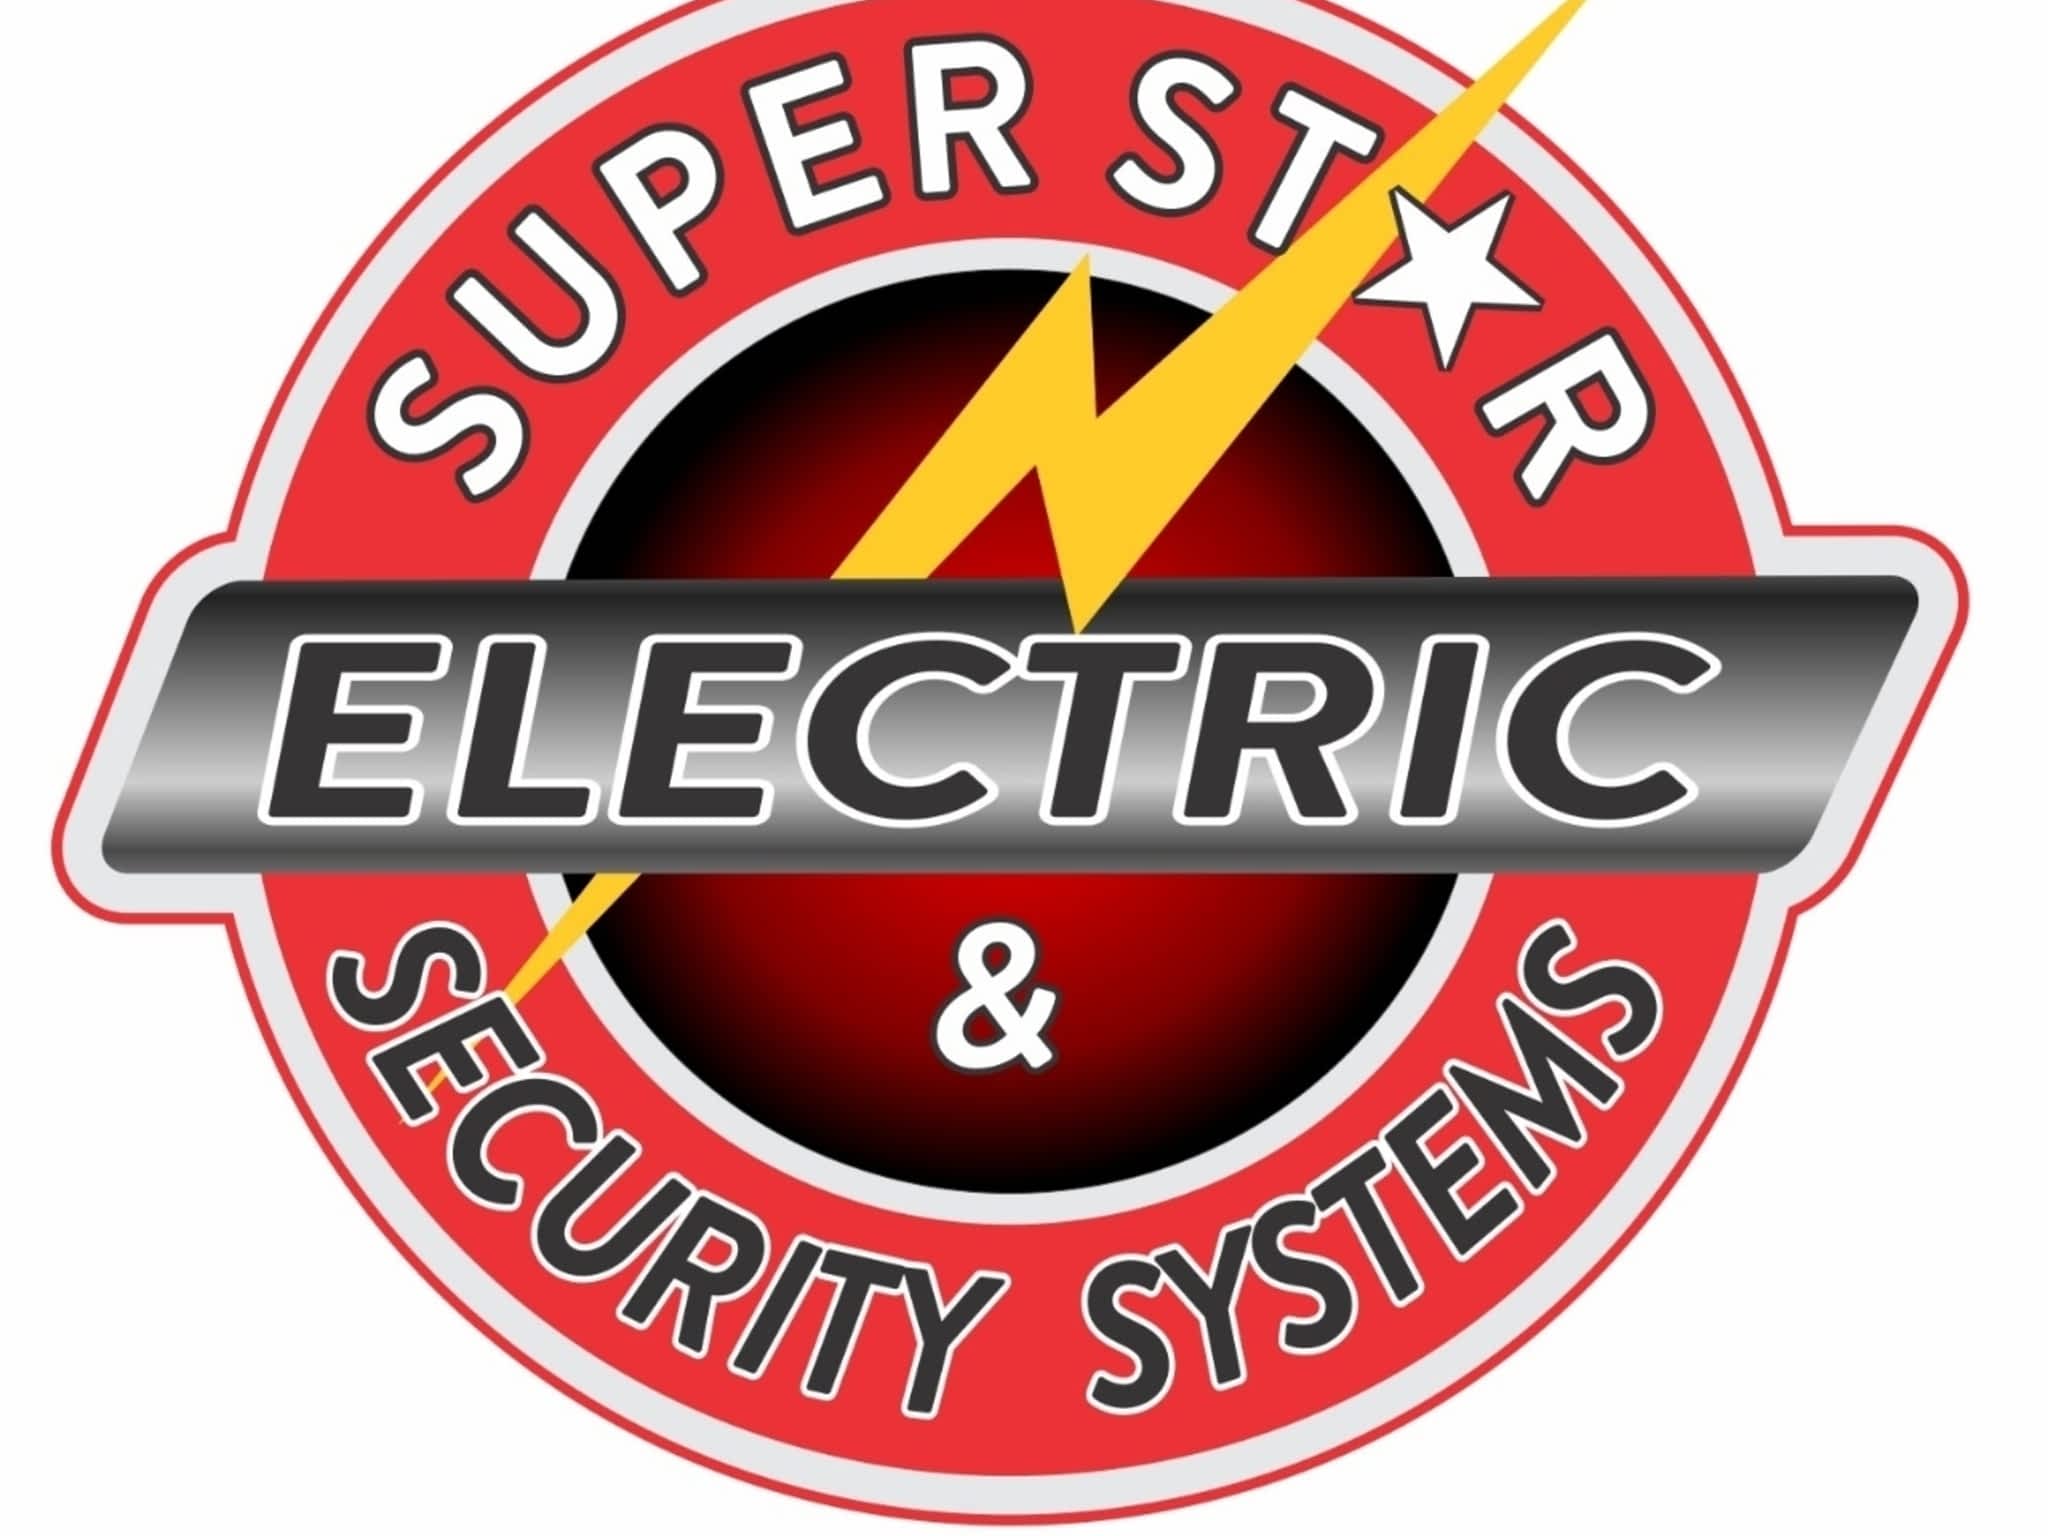 photo Super Star Electric & Security Systems Ltd